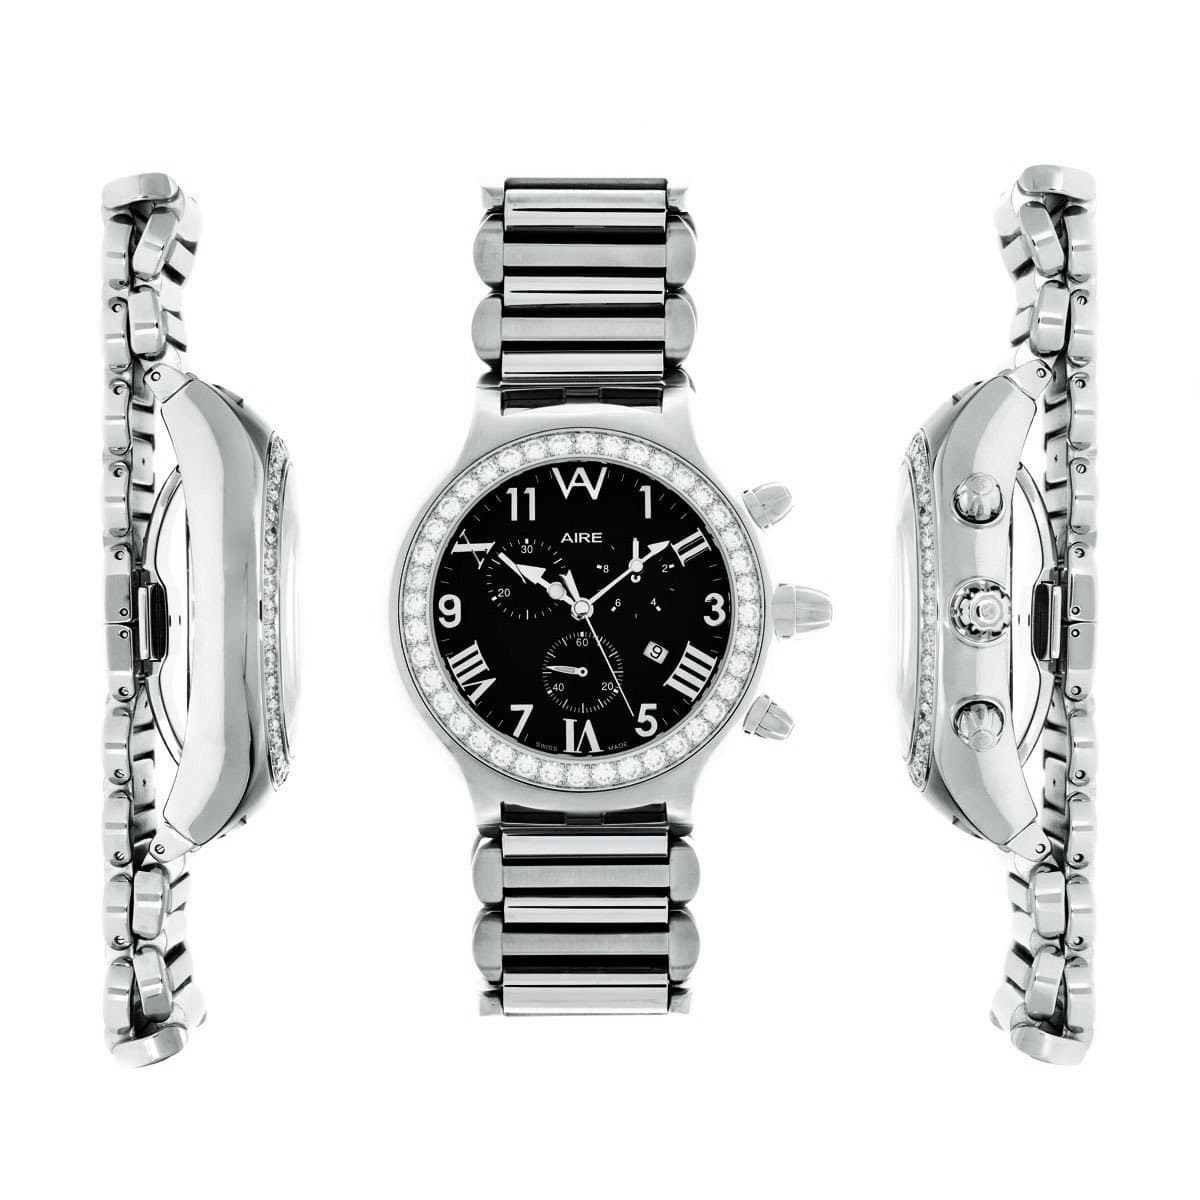 Watch - Aire Parlay Swiss Made Chronograph Quartz Over-Sized Diamond Watch For Men